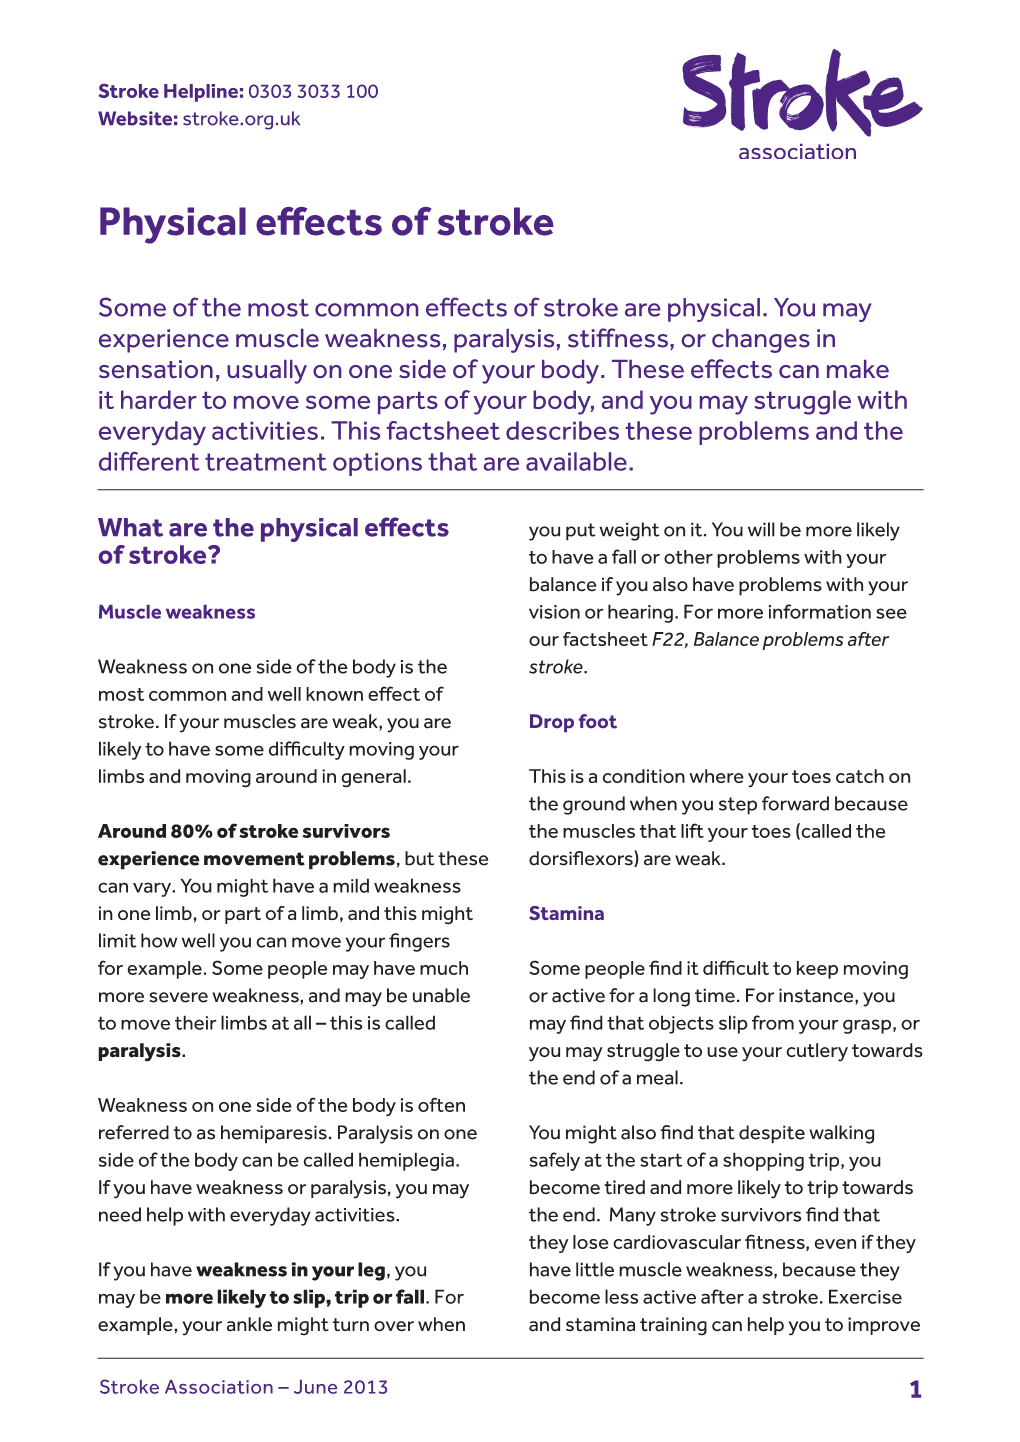 Physical Effects of Stroke